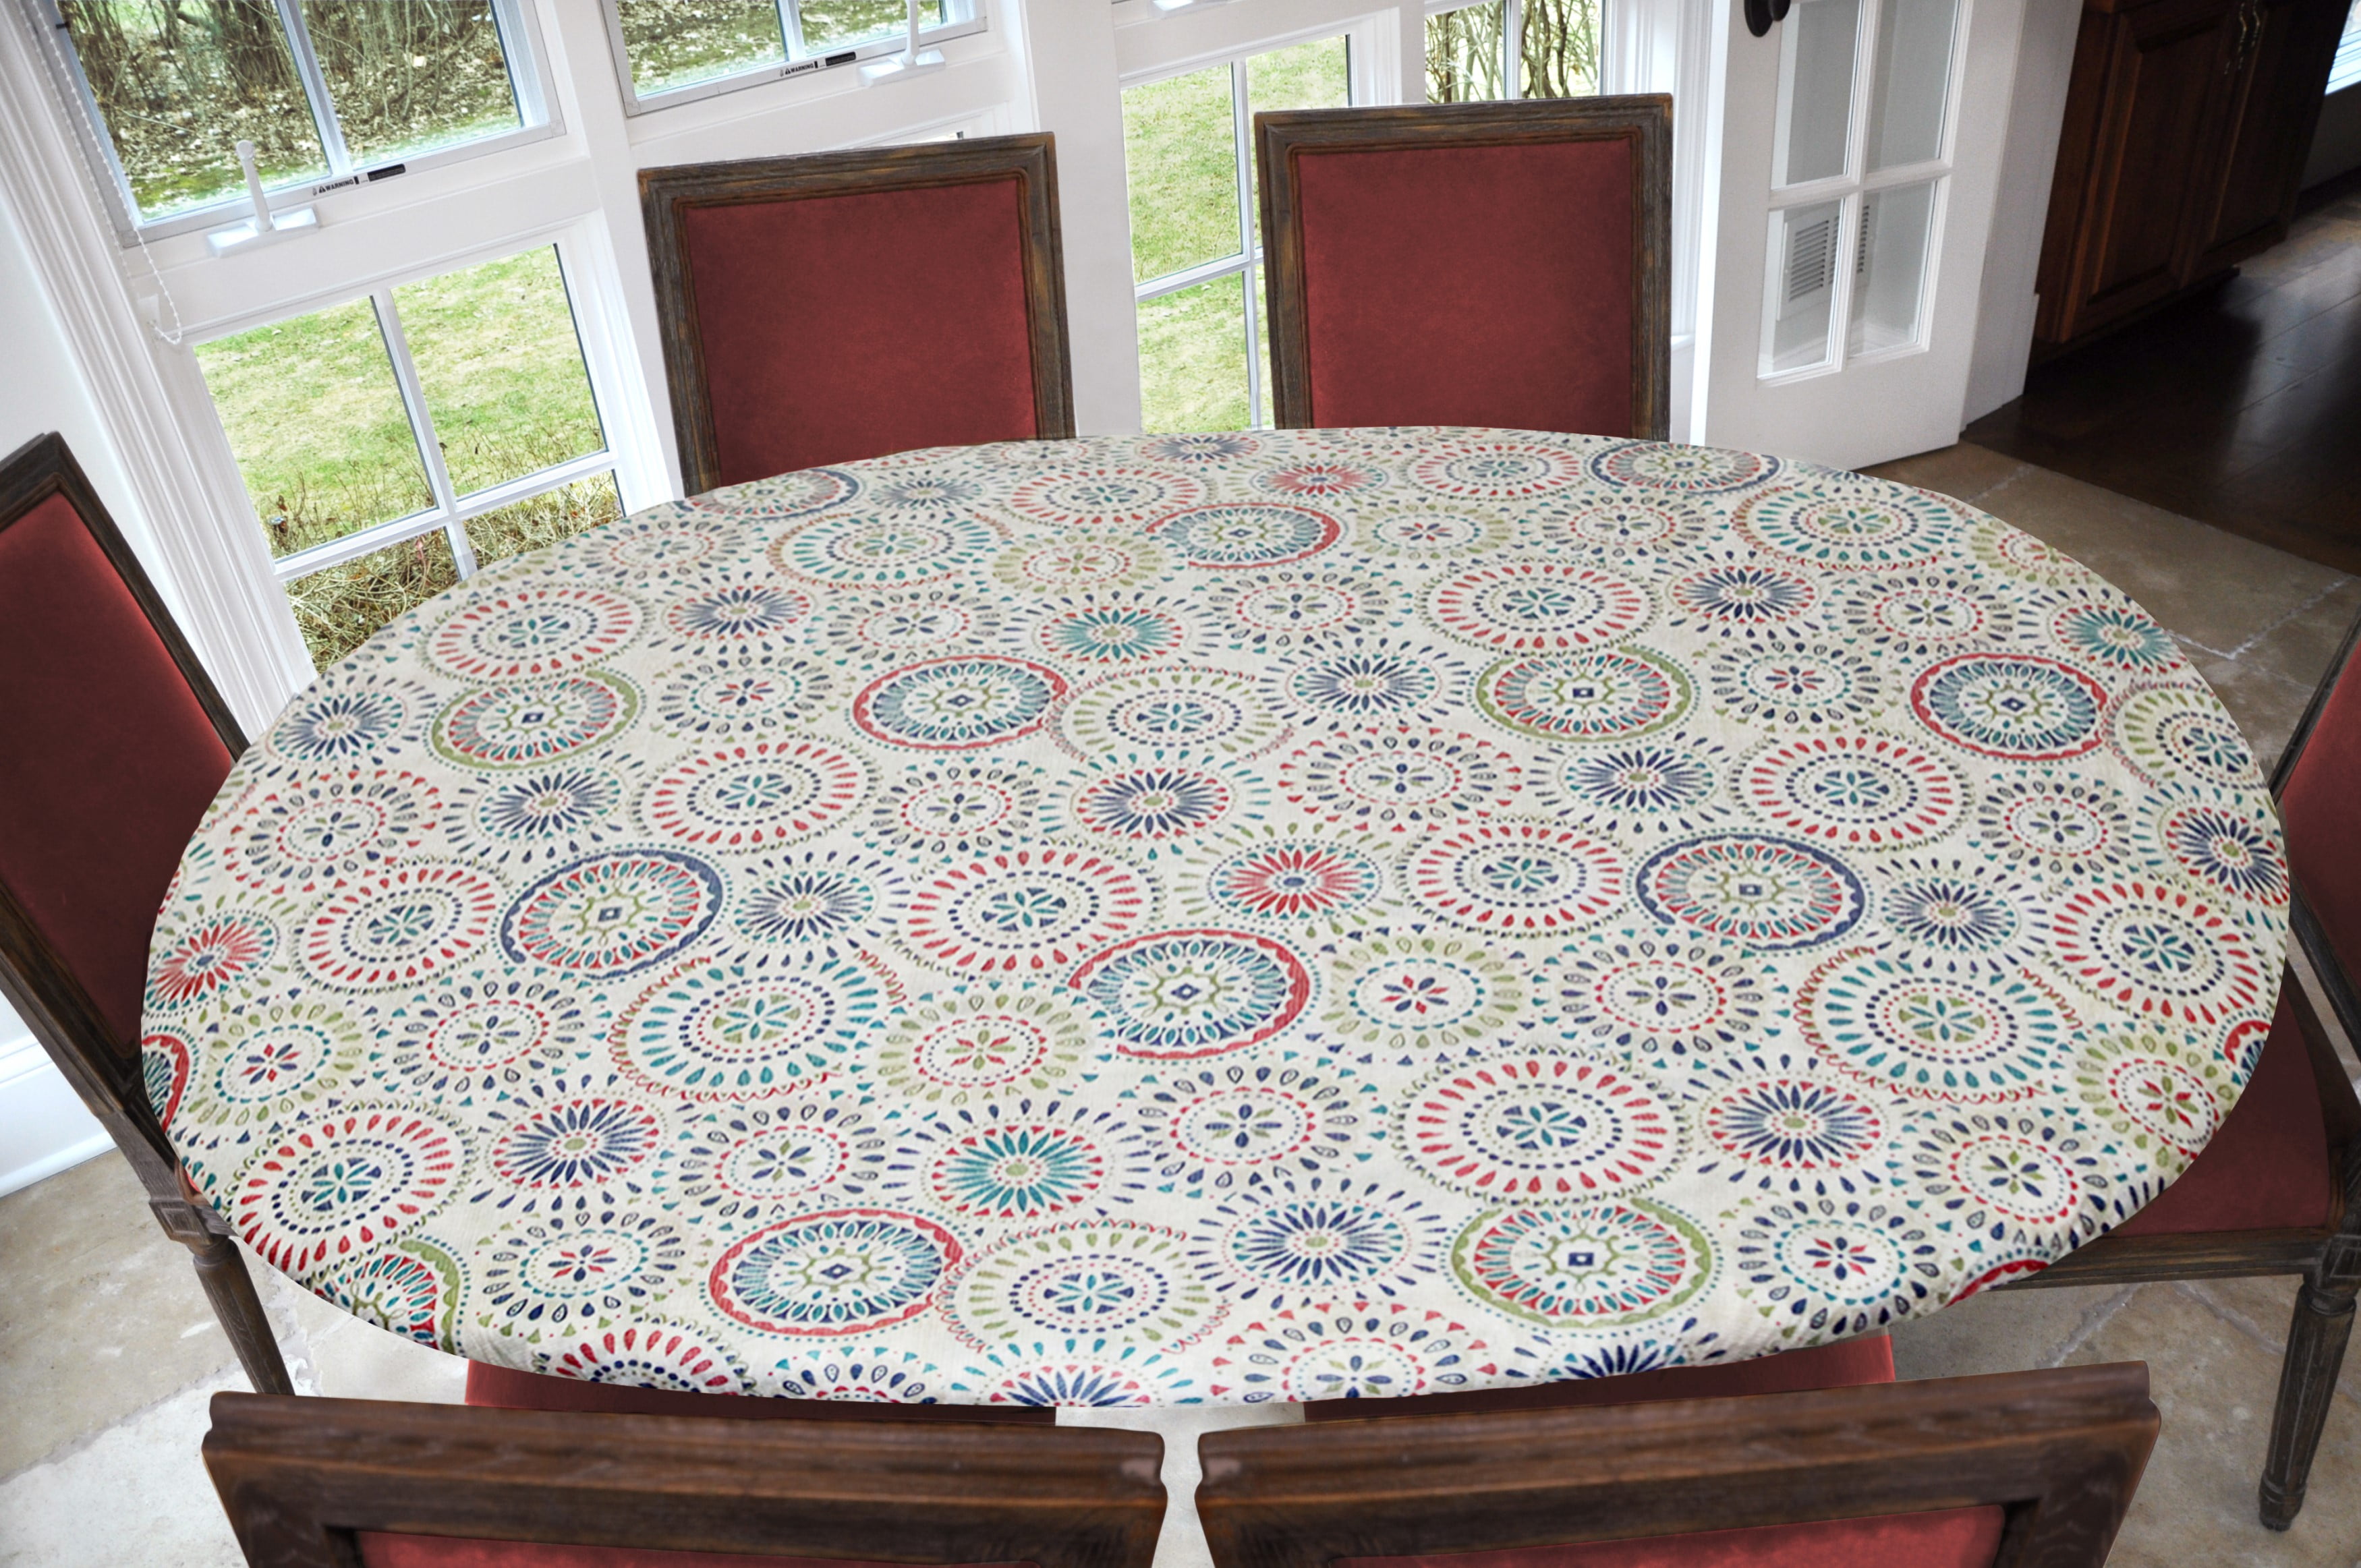 Elastic Edged Table Cover Global Coffee Pattern Oblong Tables up to 48 W x 68L